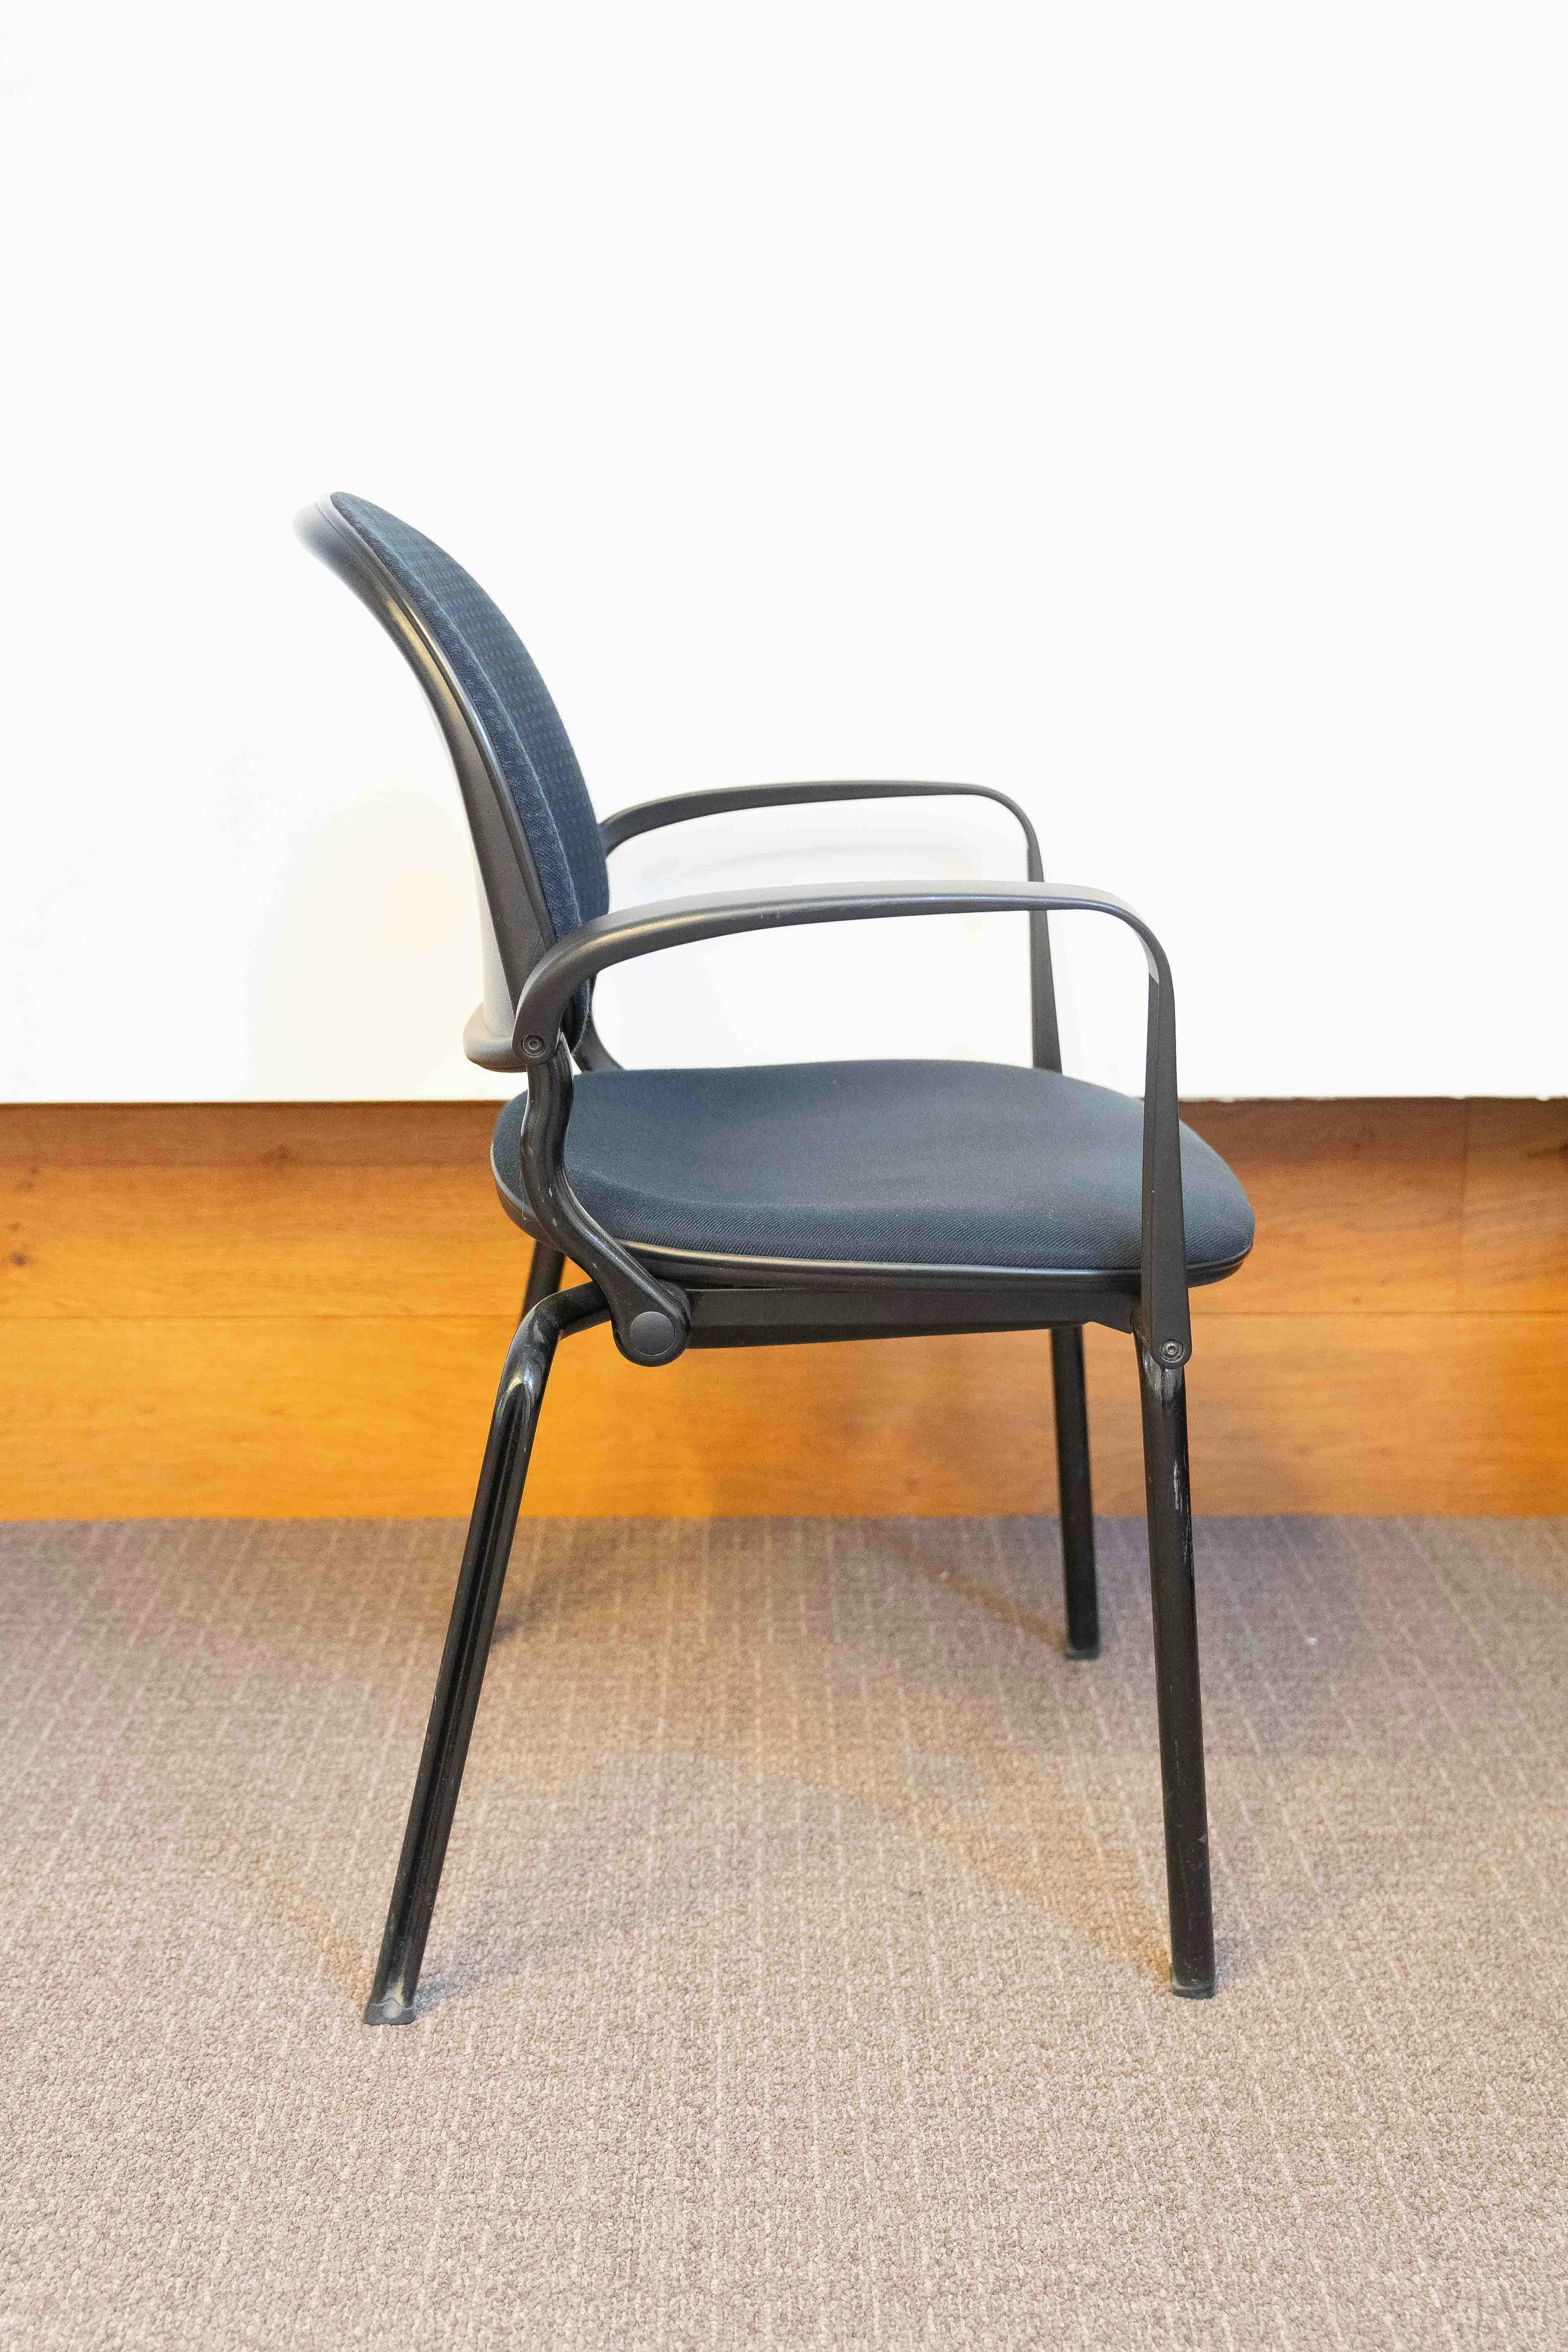 Comforto black cushion Meeting chair - Second hand quality "Chairs" - Relieve Furniture